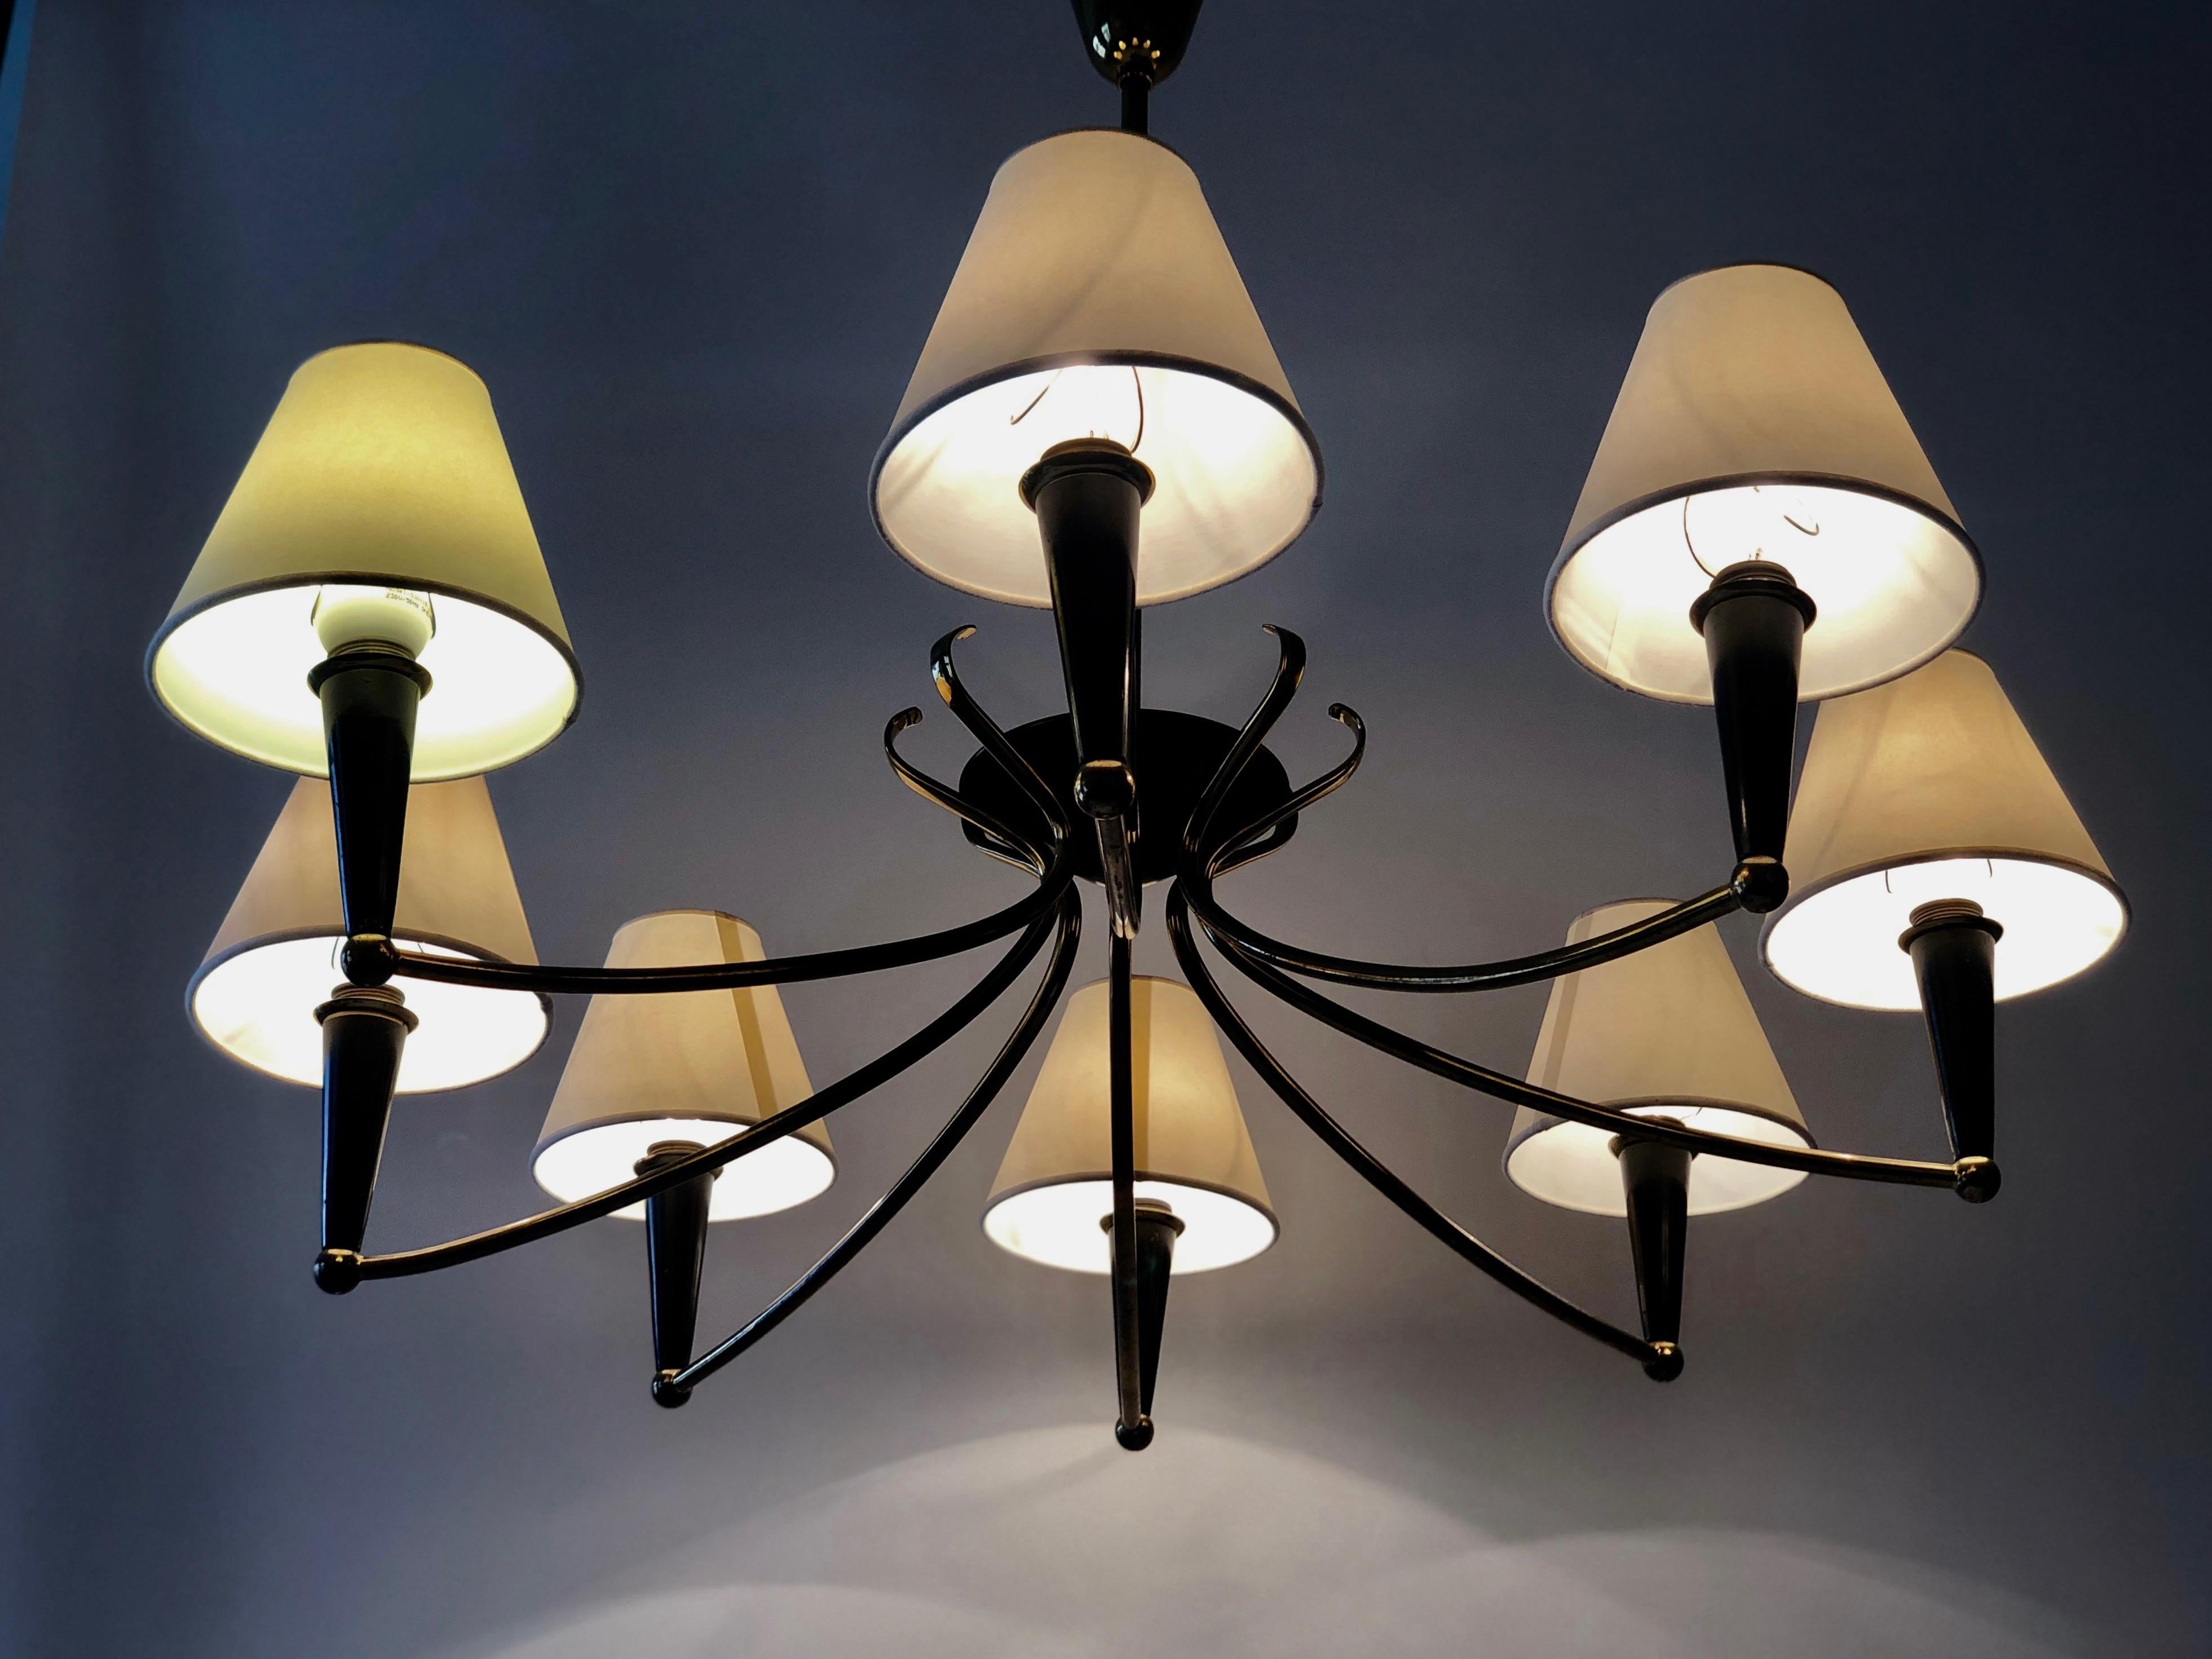 20th Century Modern Eight Arm Chandelier from Austria with Parchment Shades, 1950's For Sale